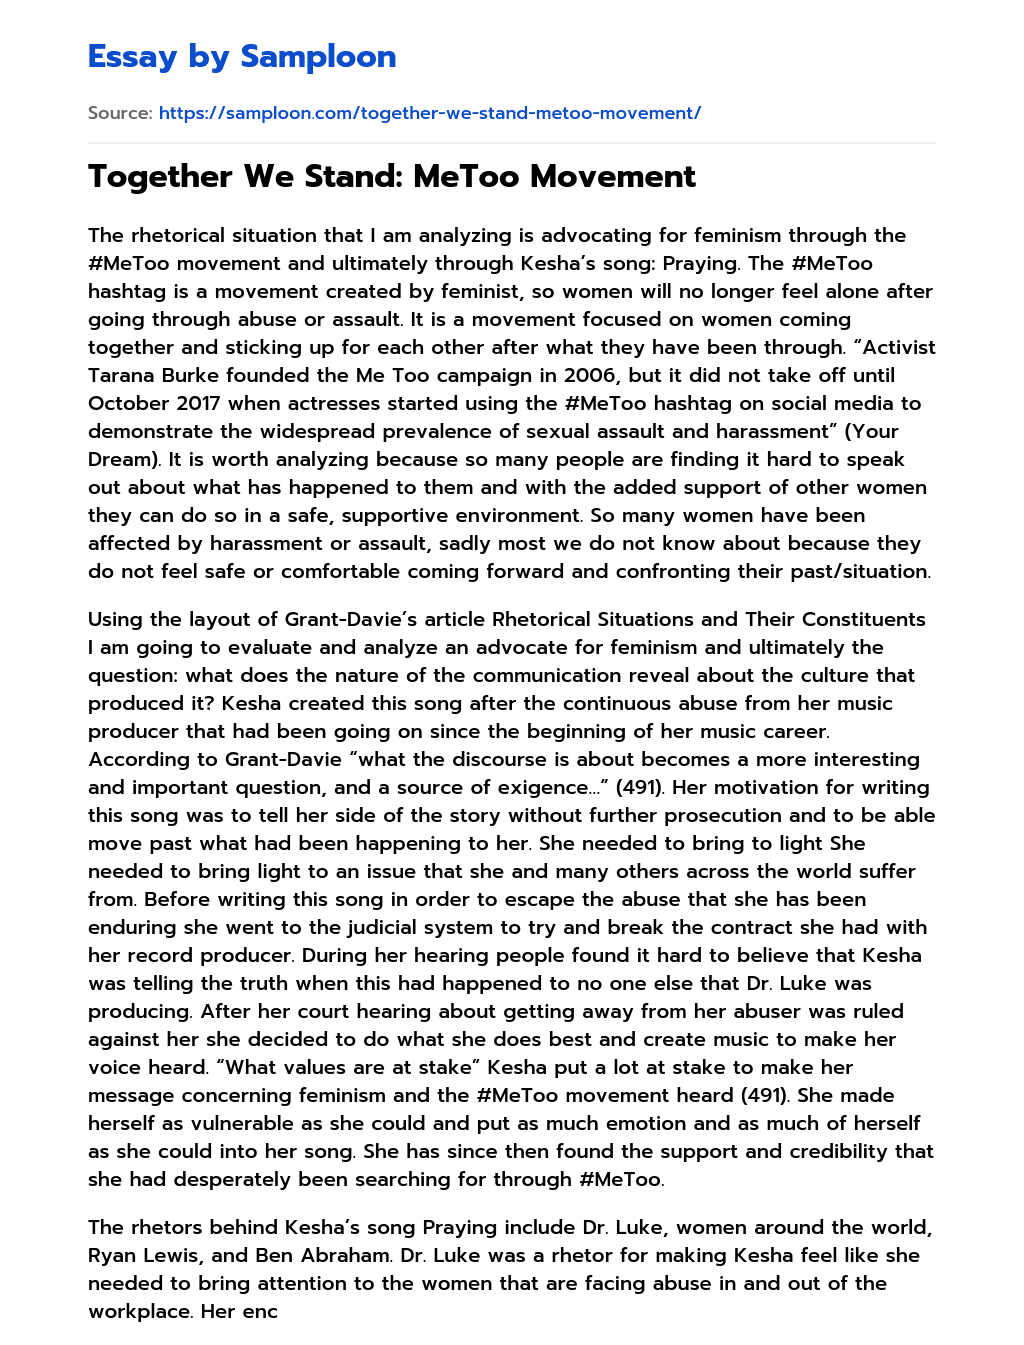 Together We Stand: MeToo Movement essay